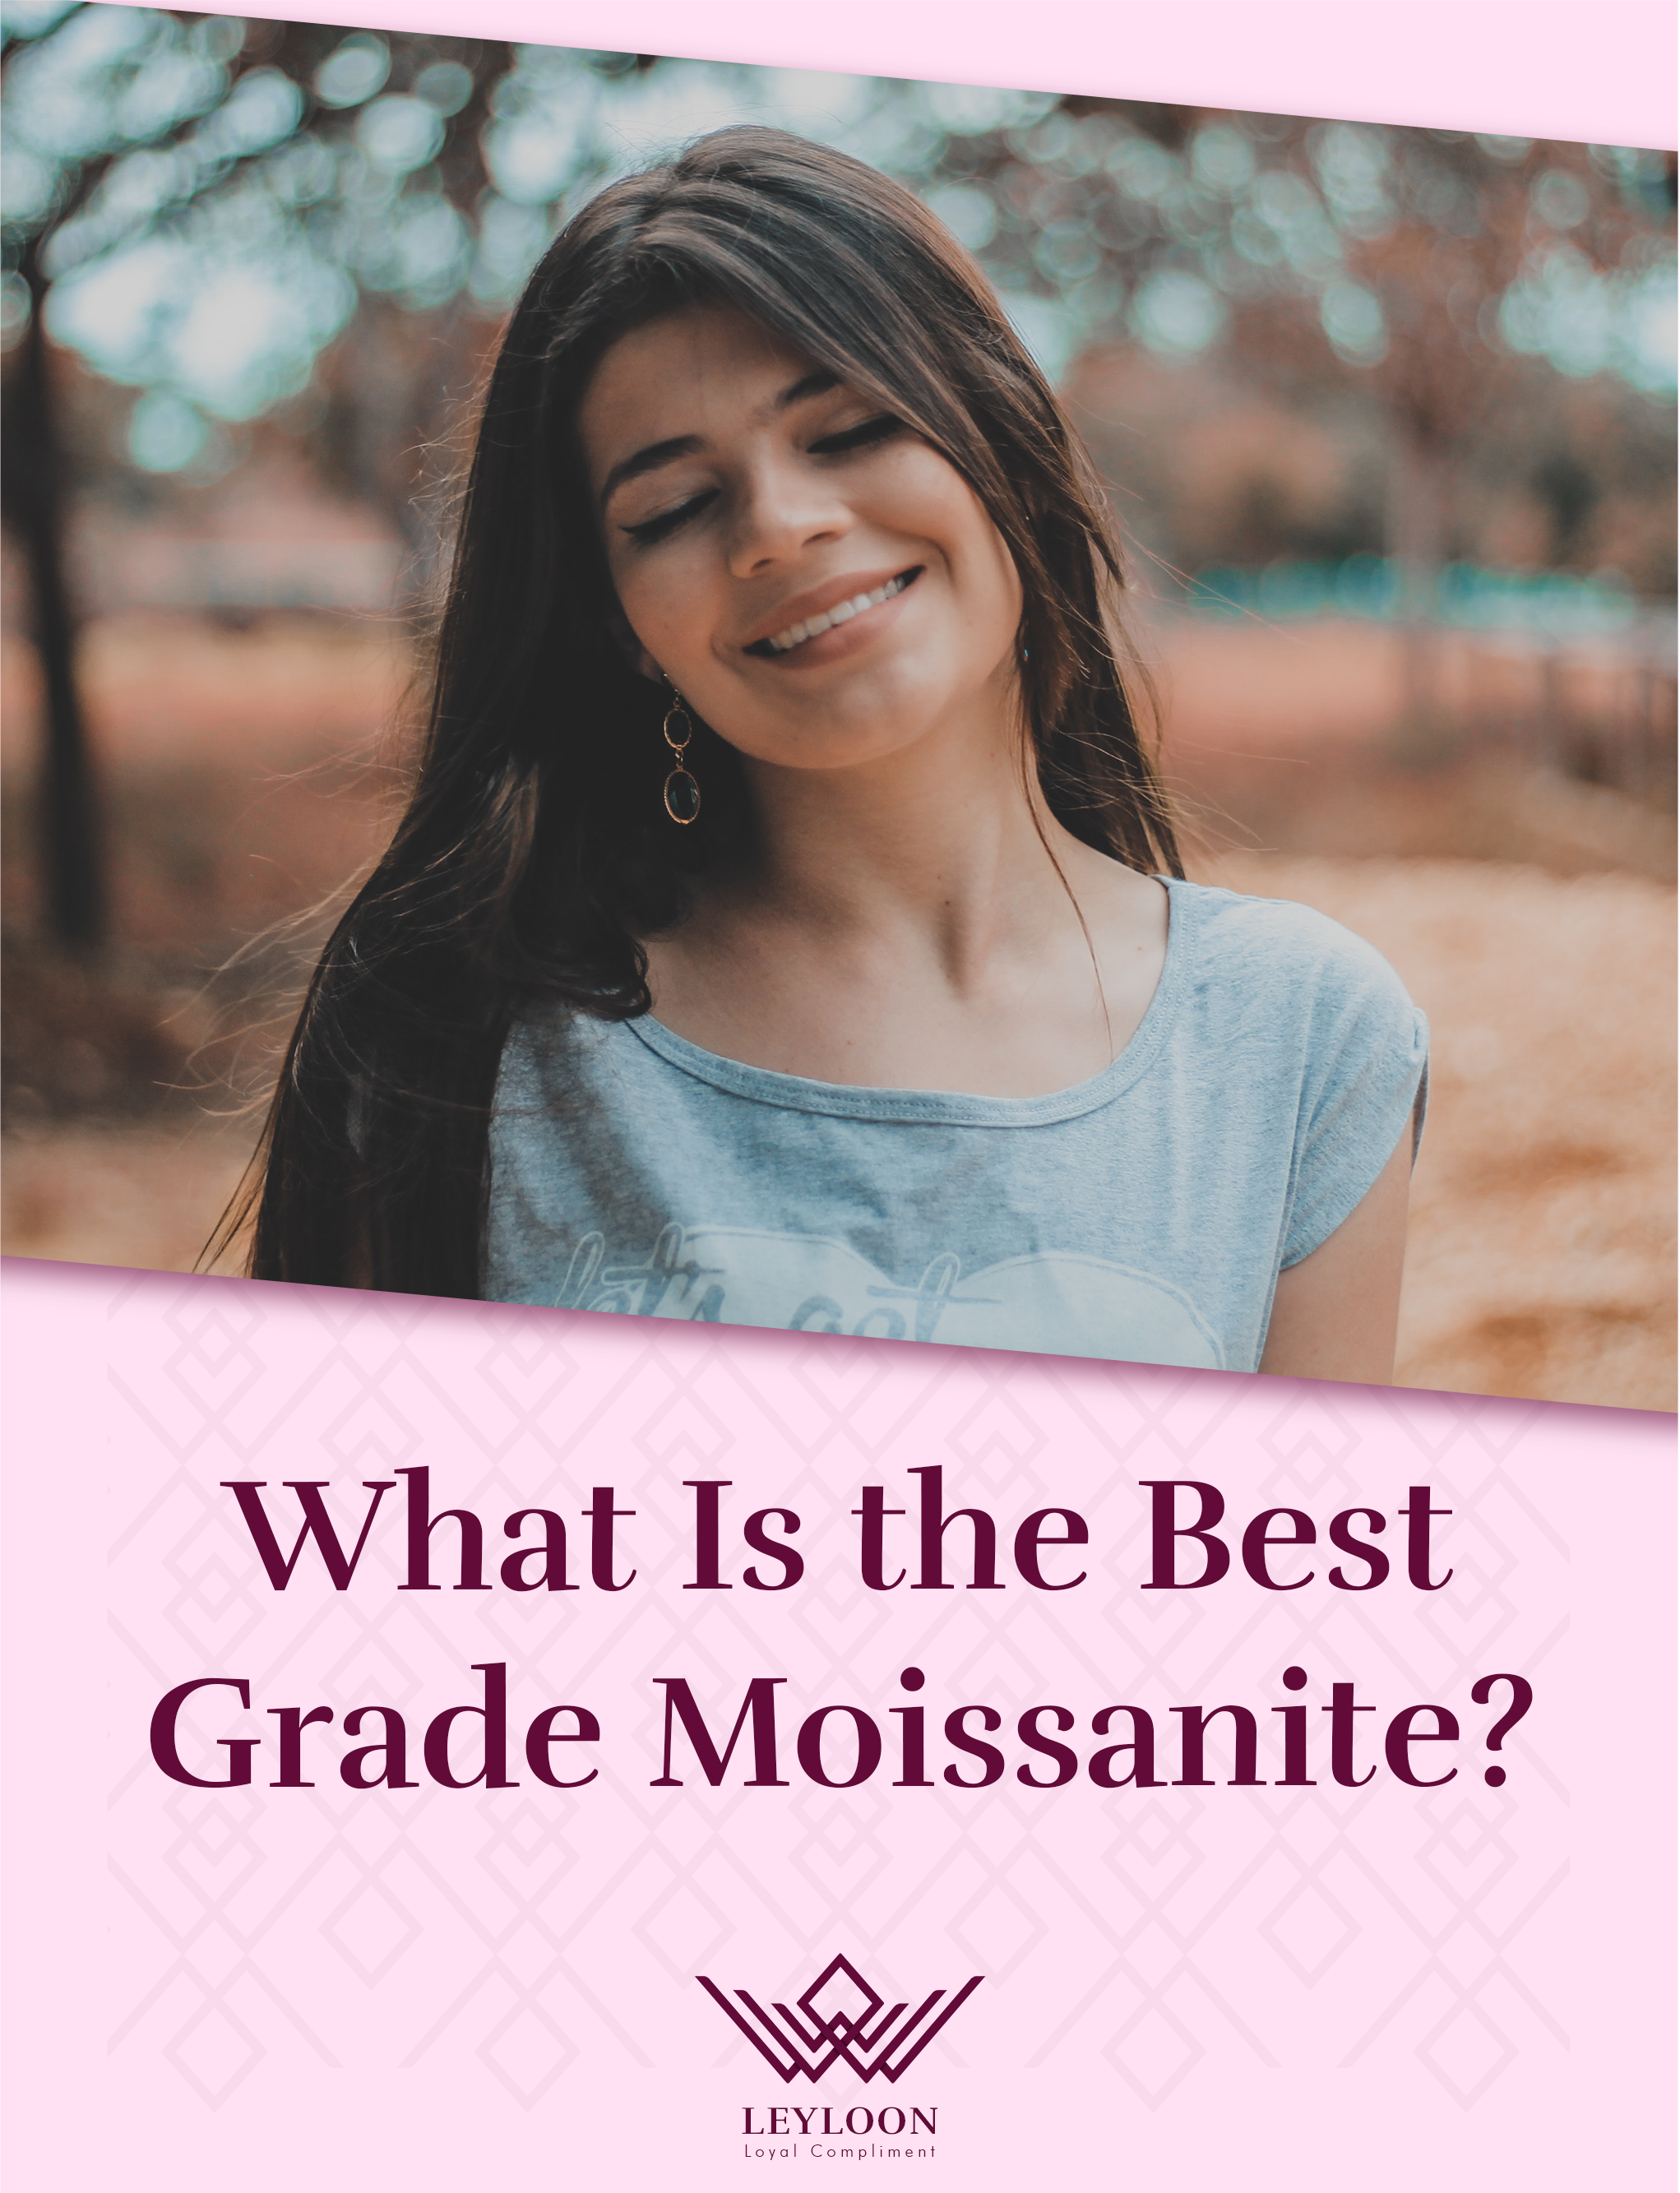 What Is The Best Grade Of Moissanite?